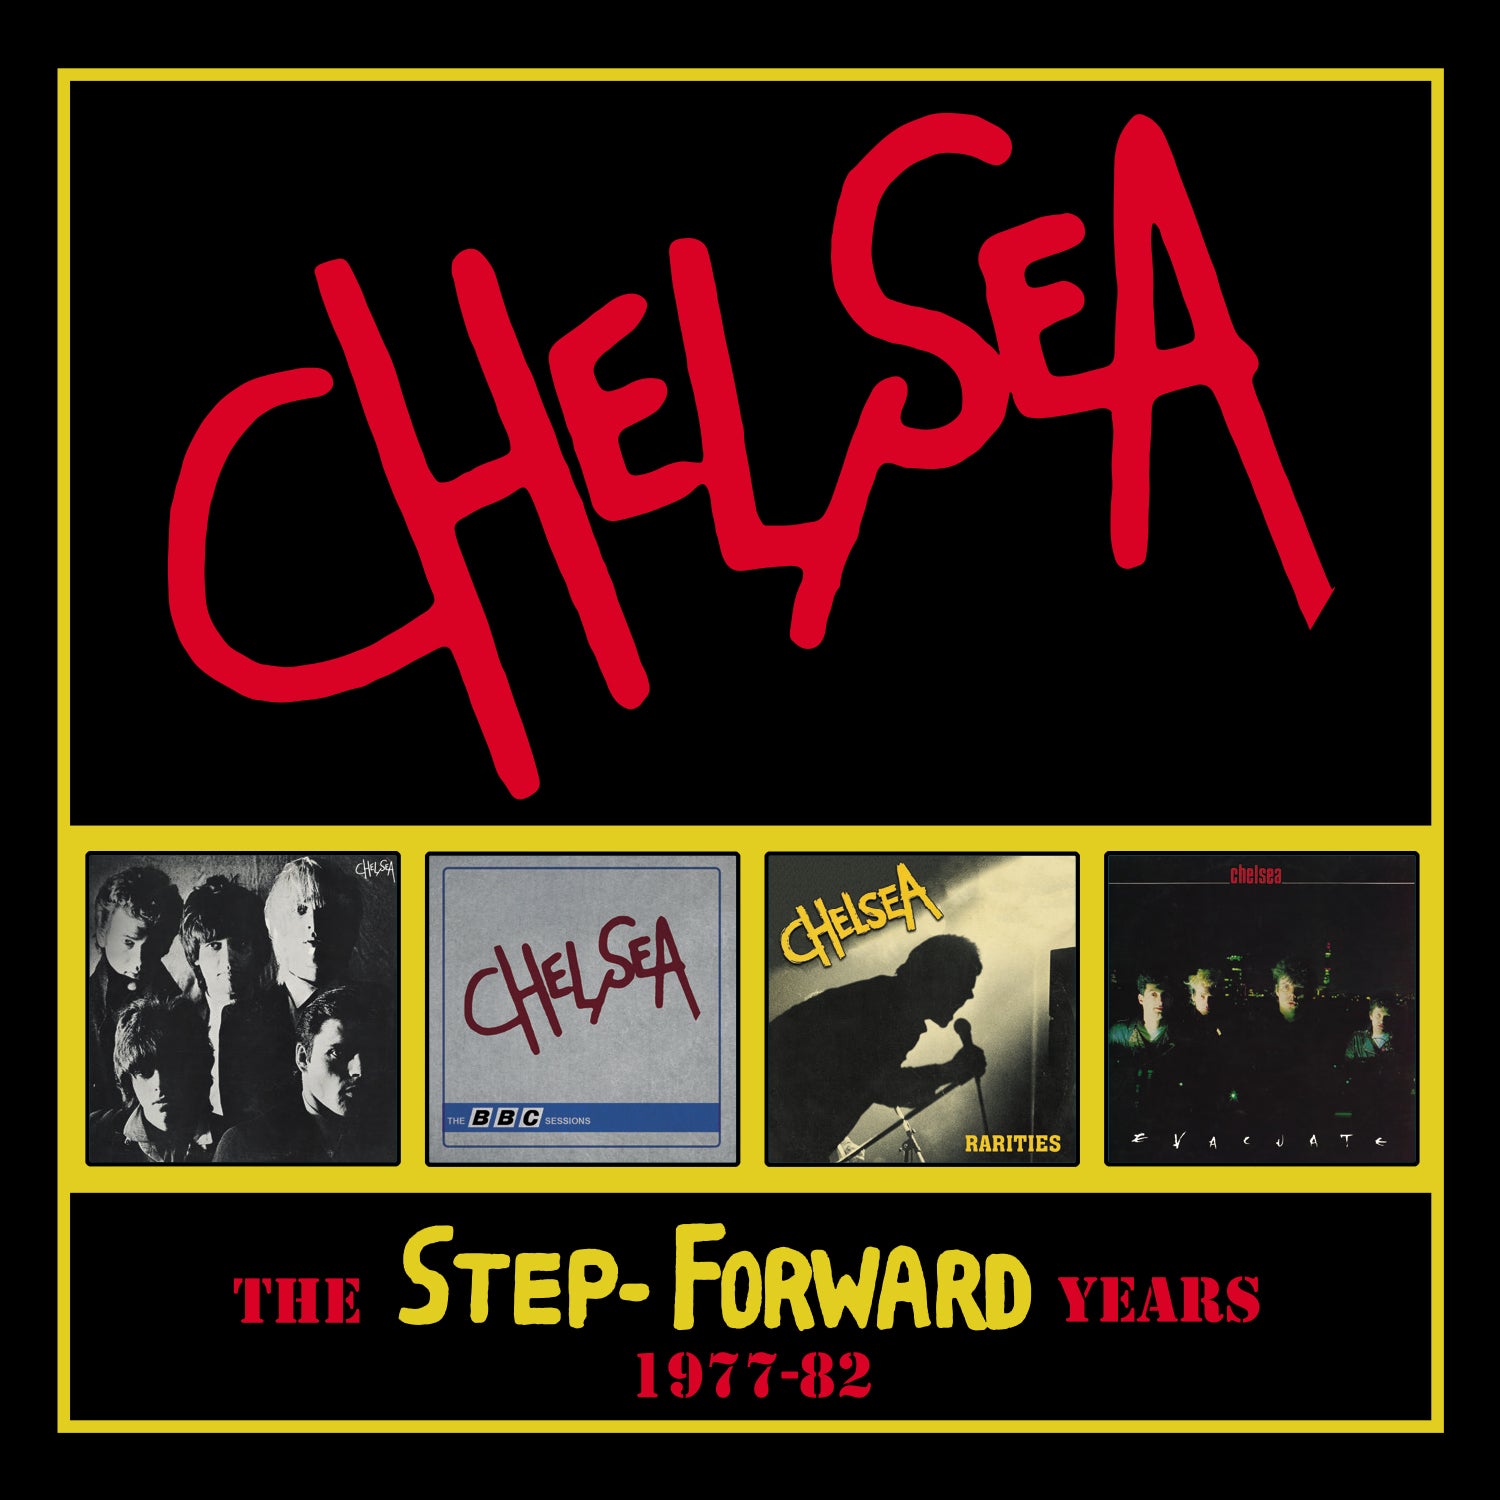 Chelsea: The Step Forward Years 1977-82 (4 CD Box Set - Imported)